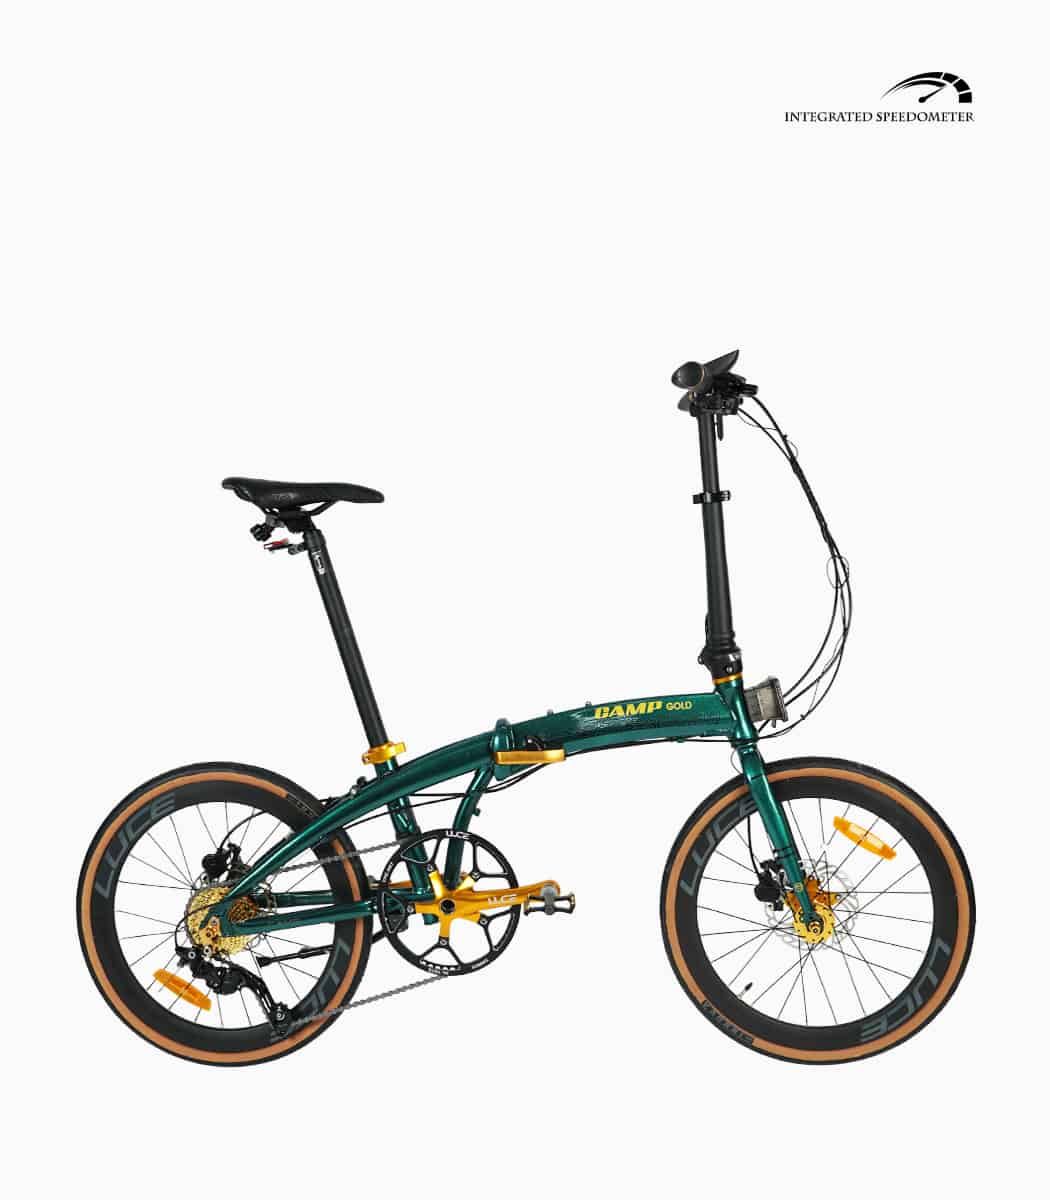 CAMP GOLD Sport (SHINNING GREEN) foldable bicycle with speedometer right